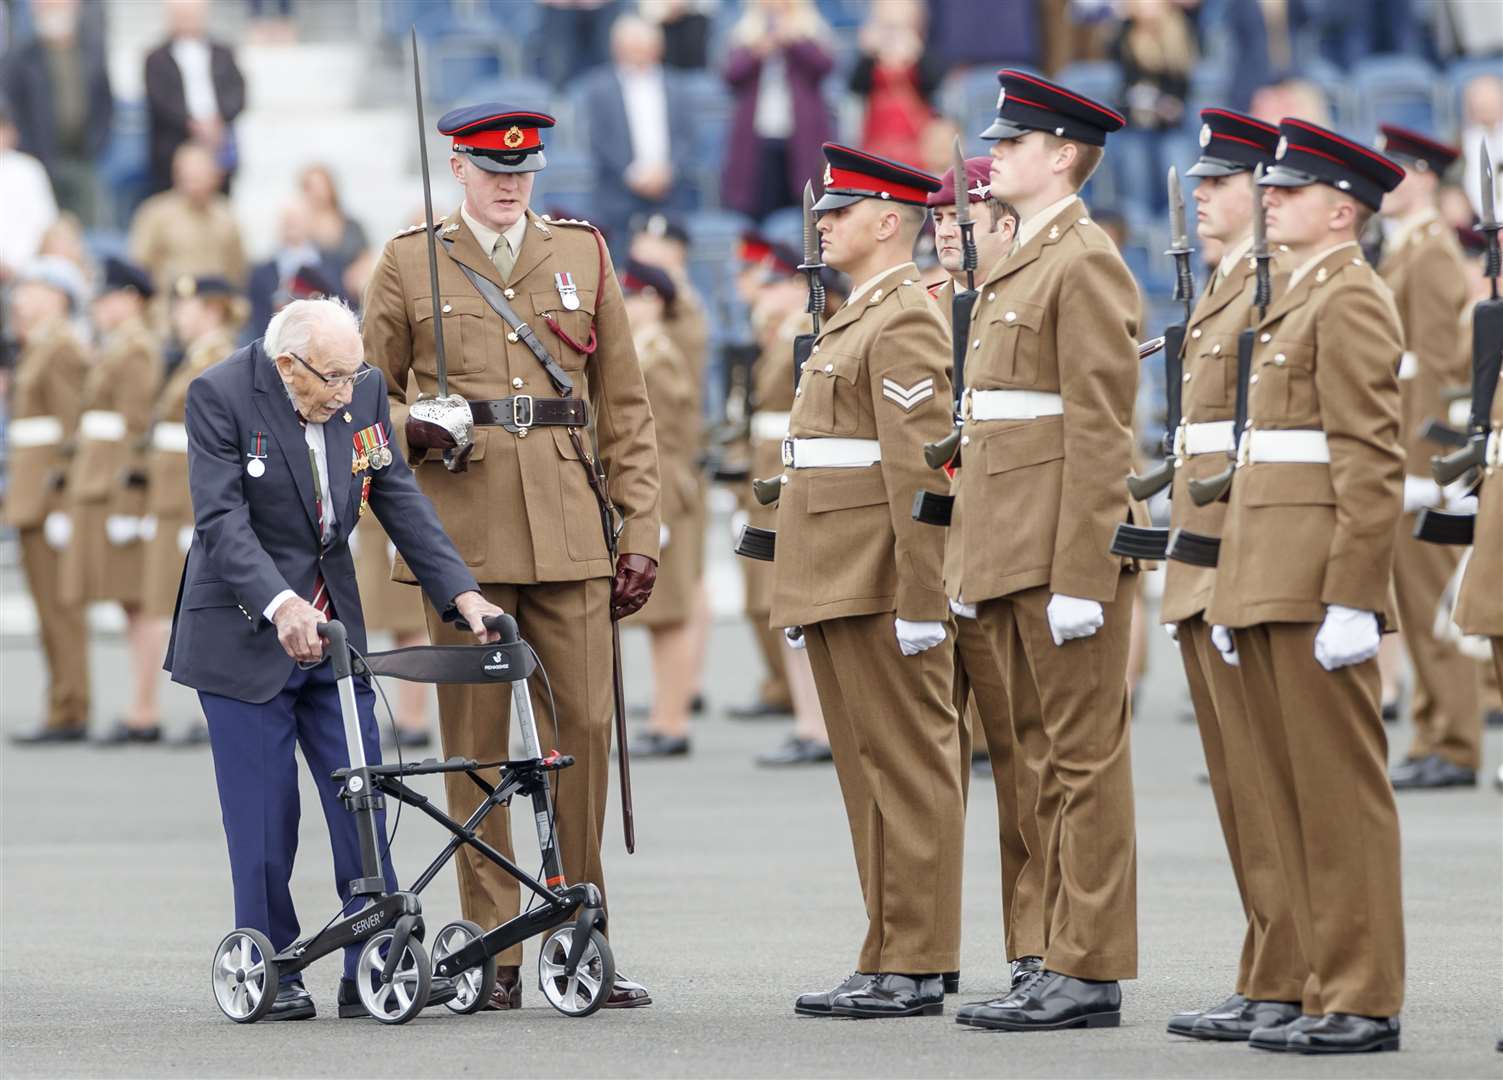 In the role of Chief Inspecting Officer, Captain Sir Tom Moore, inspects the Junior soldiers (Danny Lawson/PA)